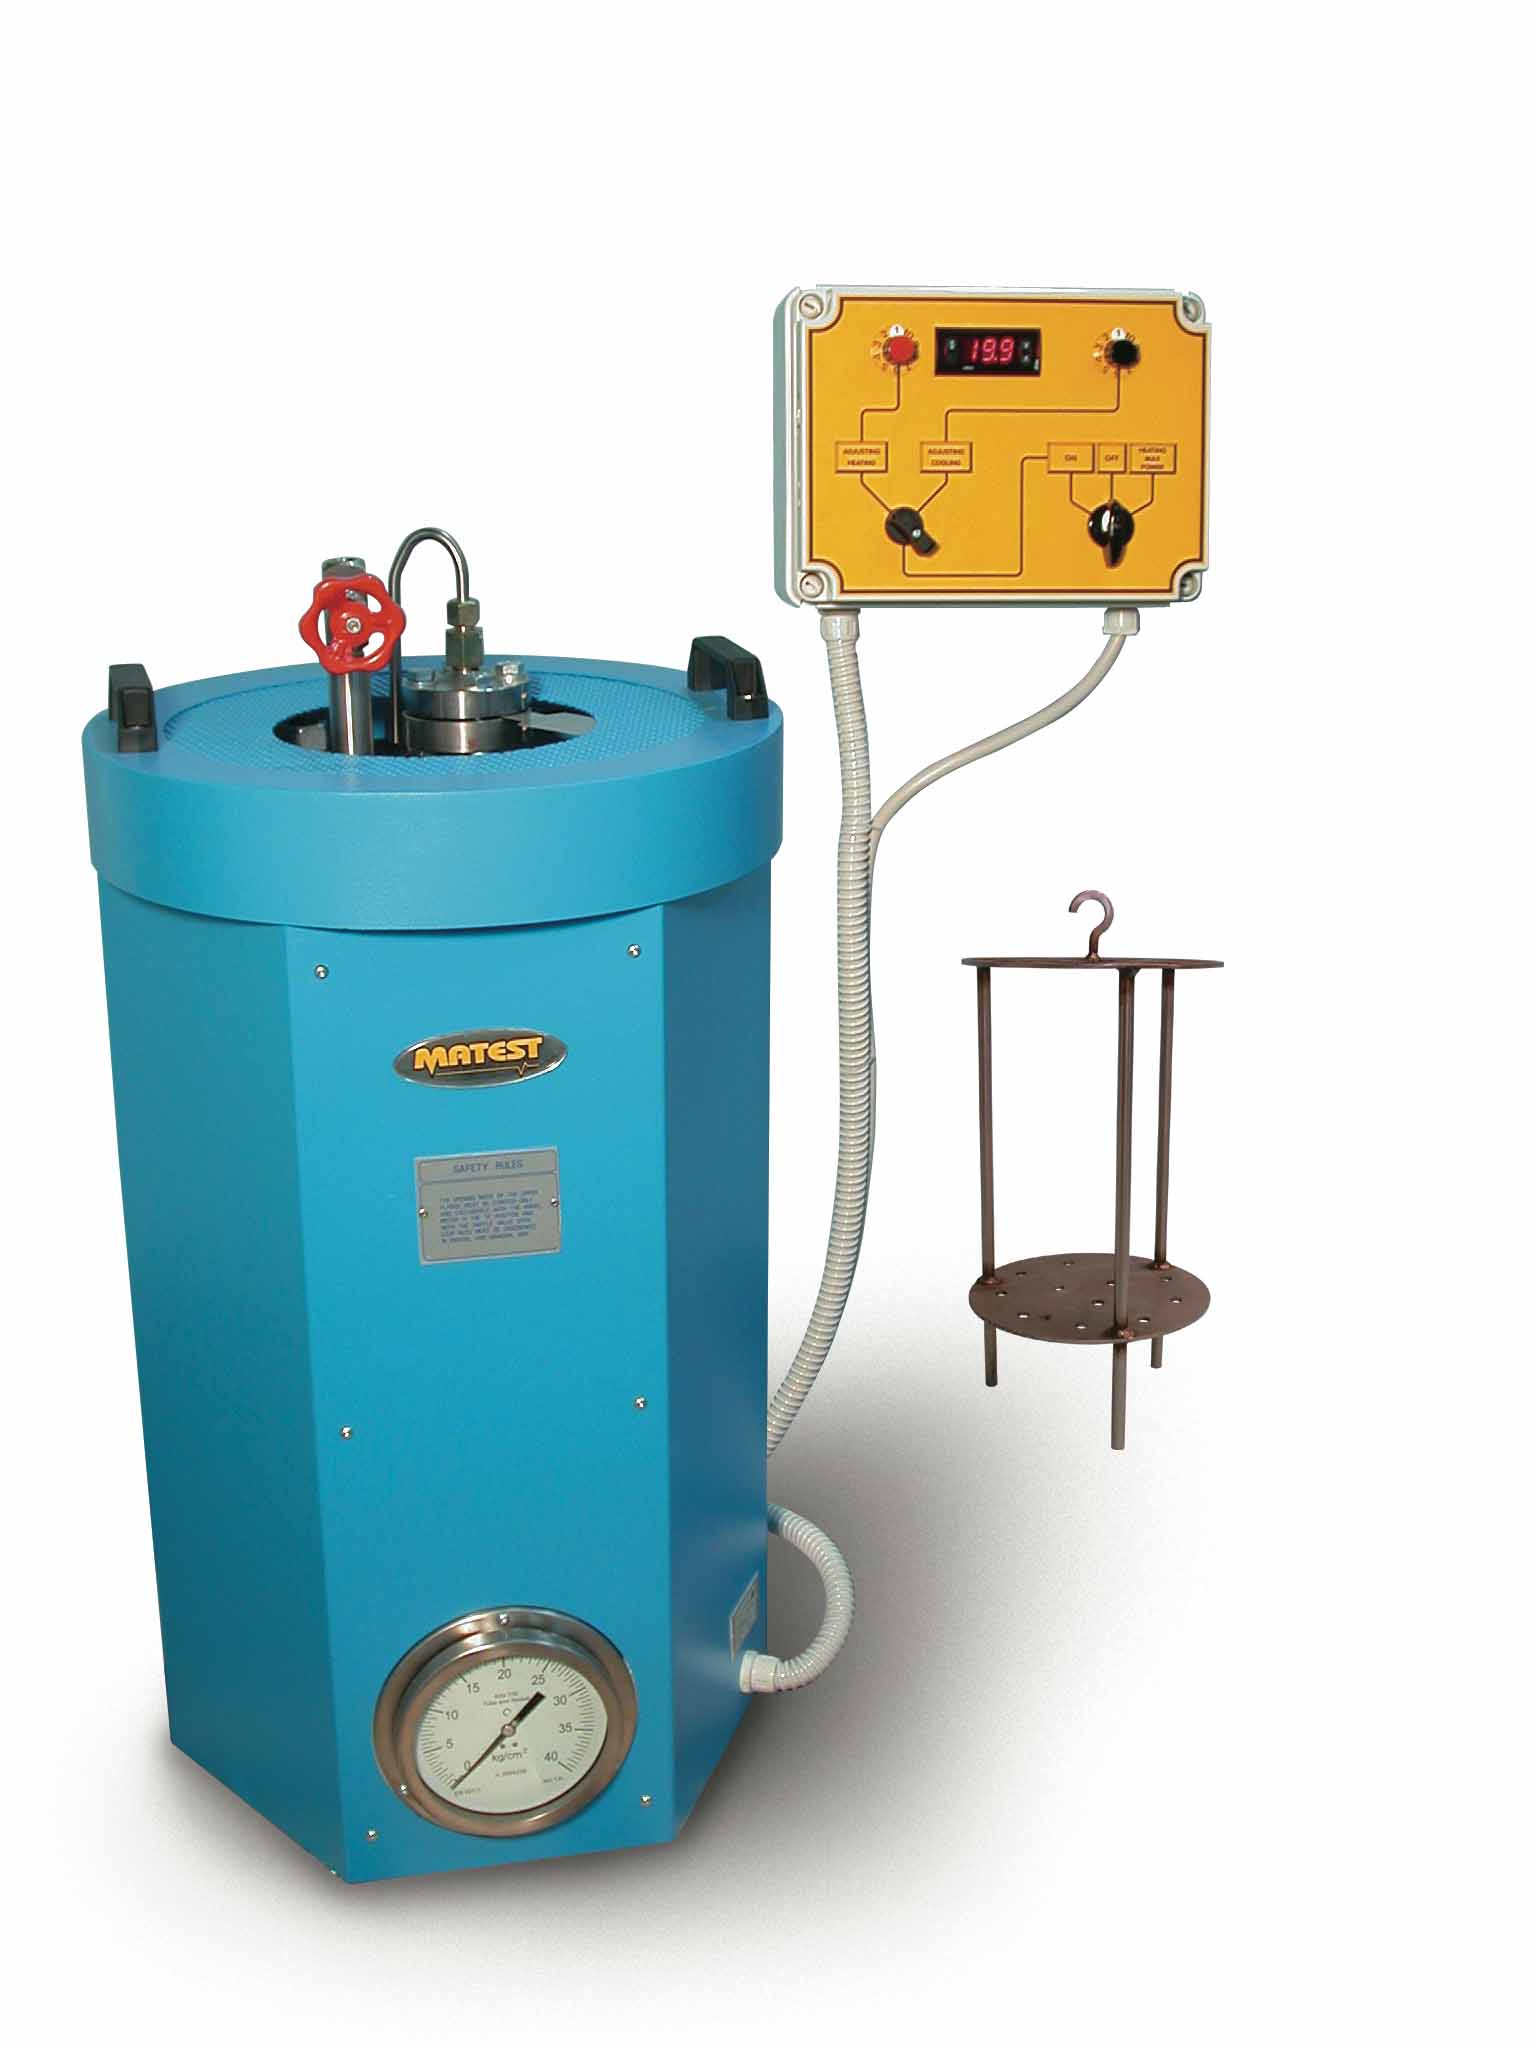  AUTOCLAVE FOR SOUNDNESS TESTS